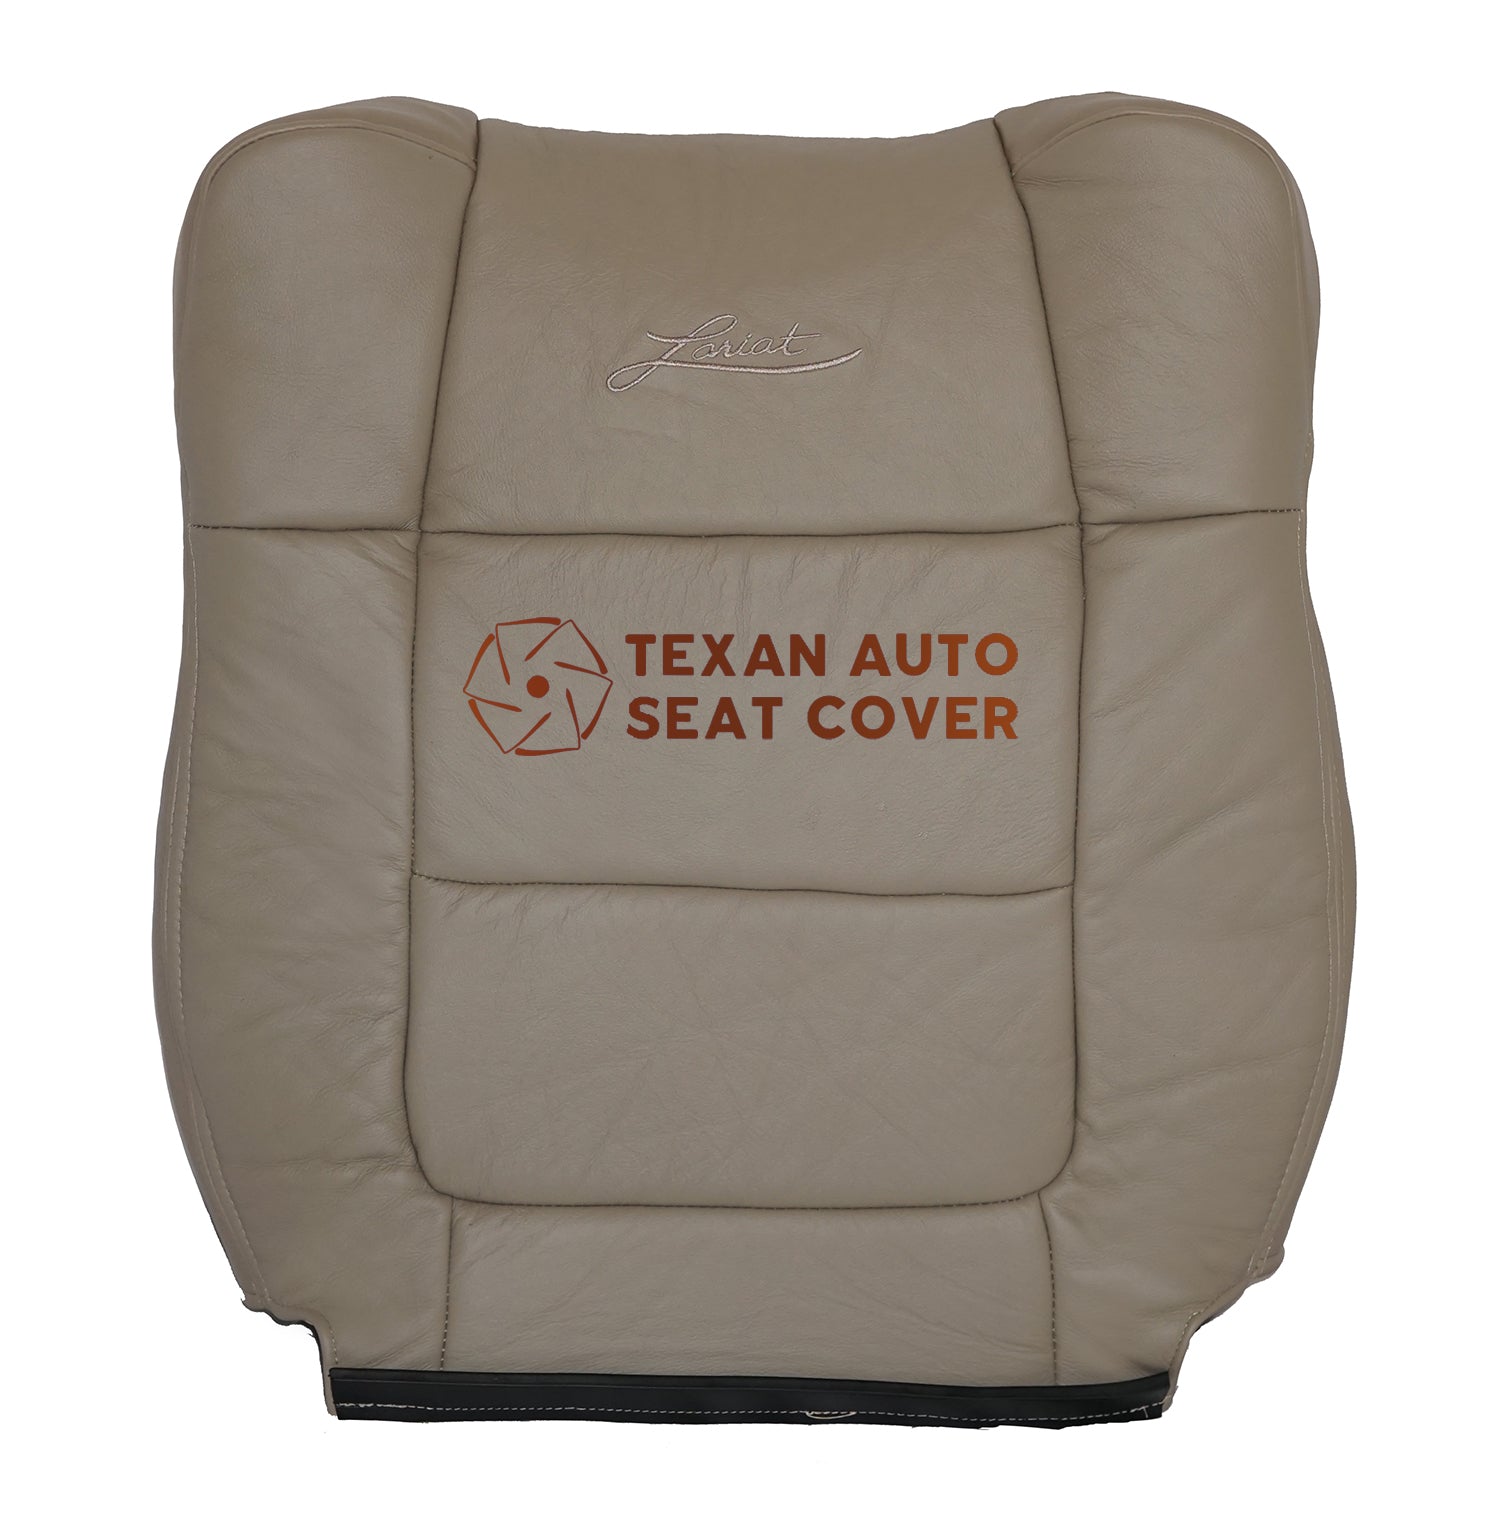 2001, 2002 Ford F150 Lariat Passenger Lean Back Synthetic Leather Seat Cover Tan